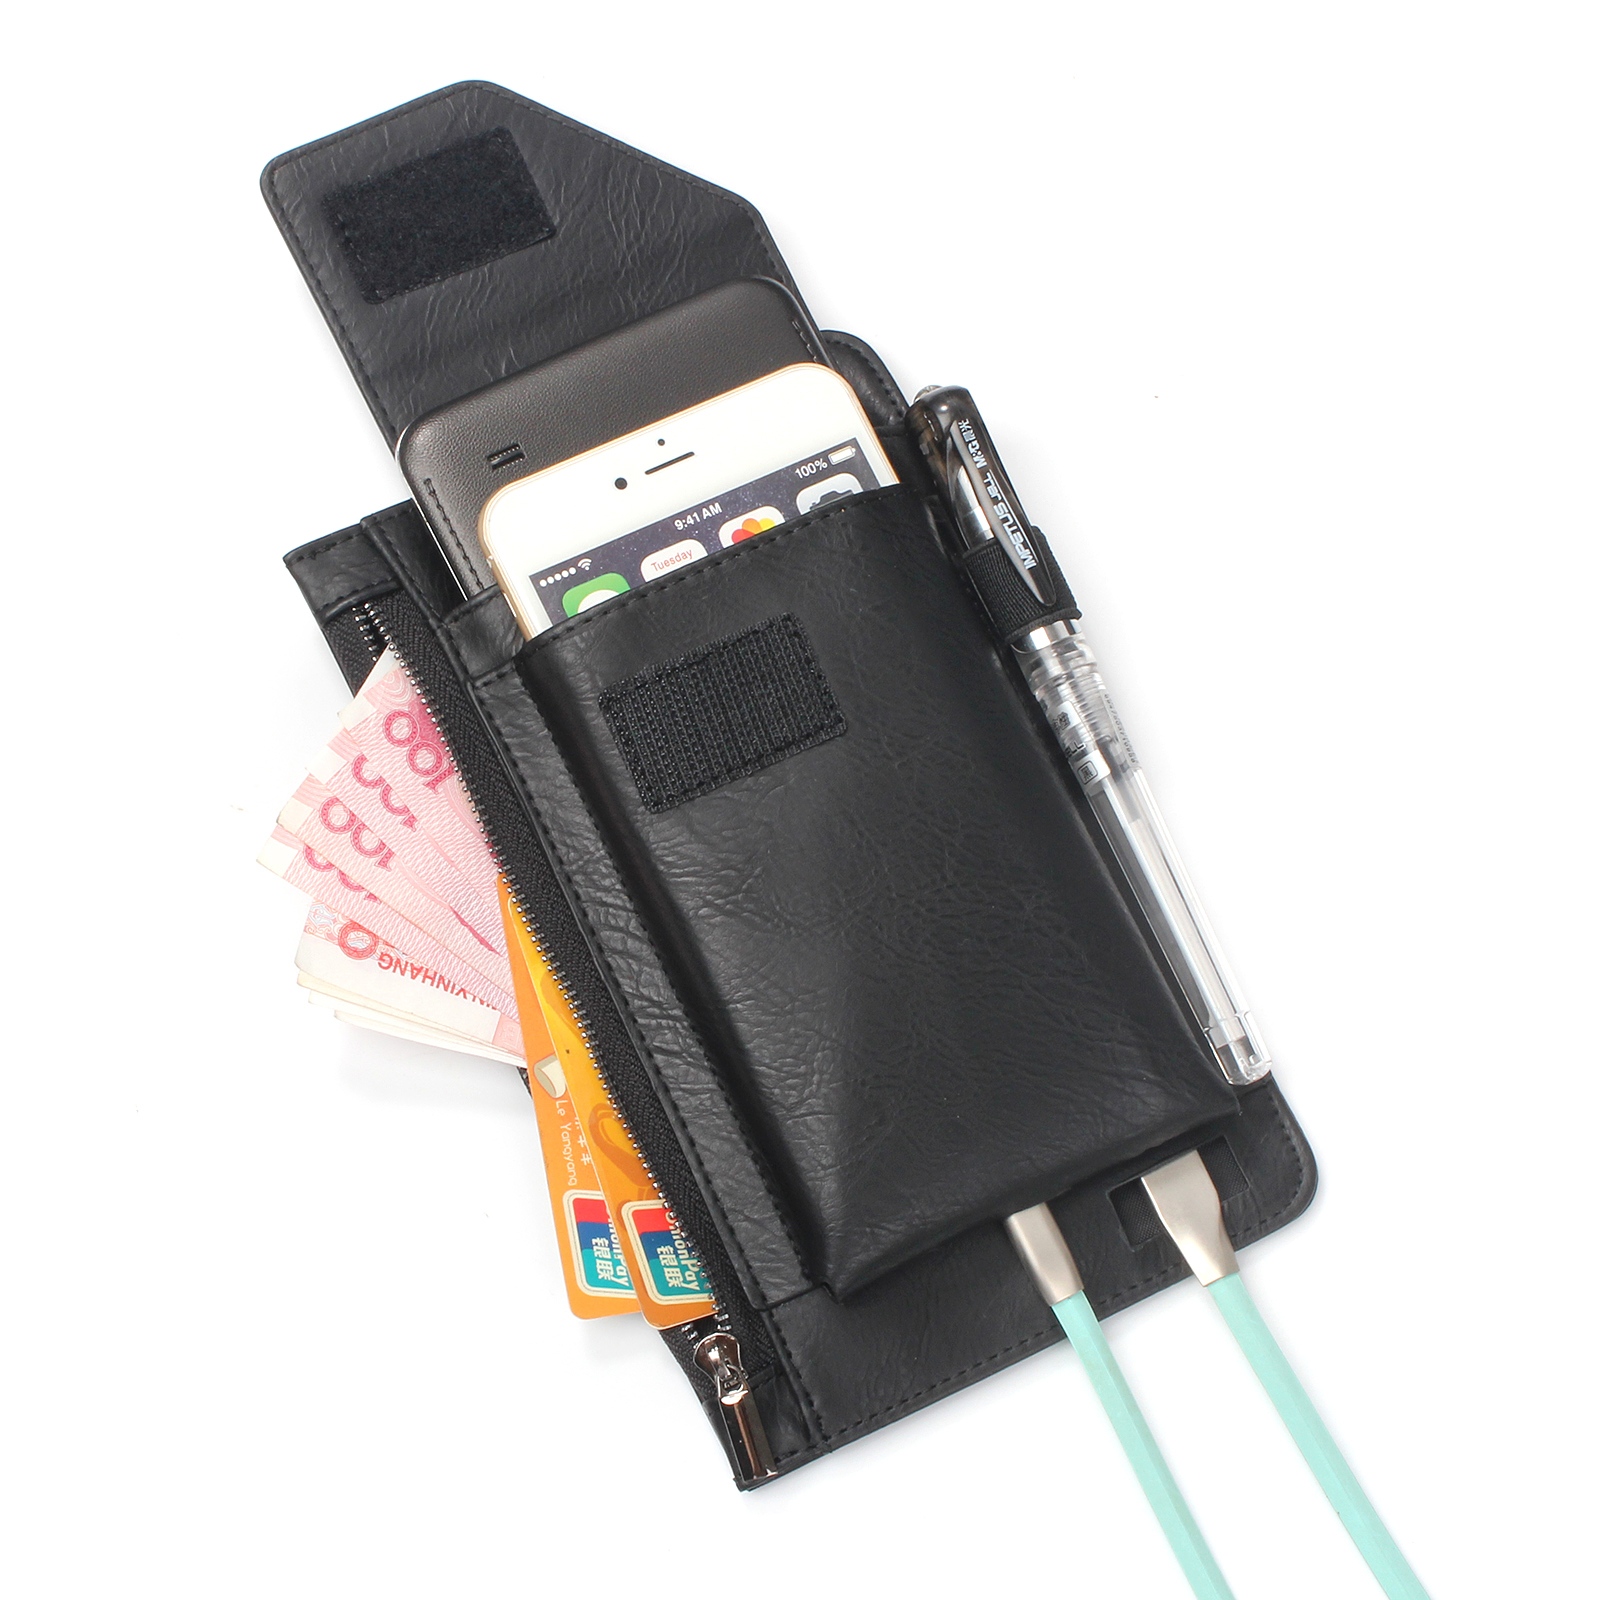 Bakeey-Casual-Vintage-Bussiness-Multi-Pocket-Reserve-Charging-Port-PU-Leather-Mobile-Phone-Money-Hik-1692248-12